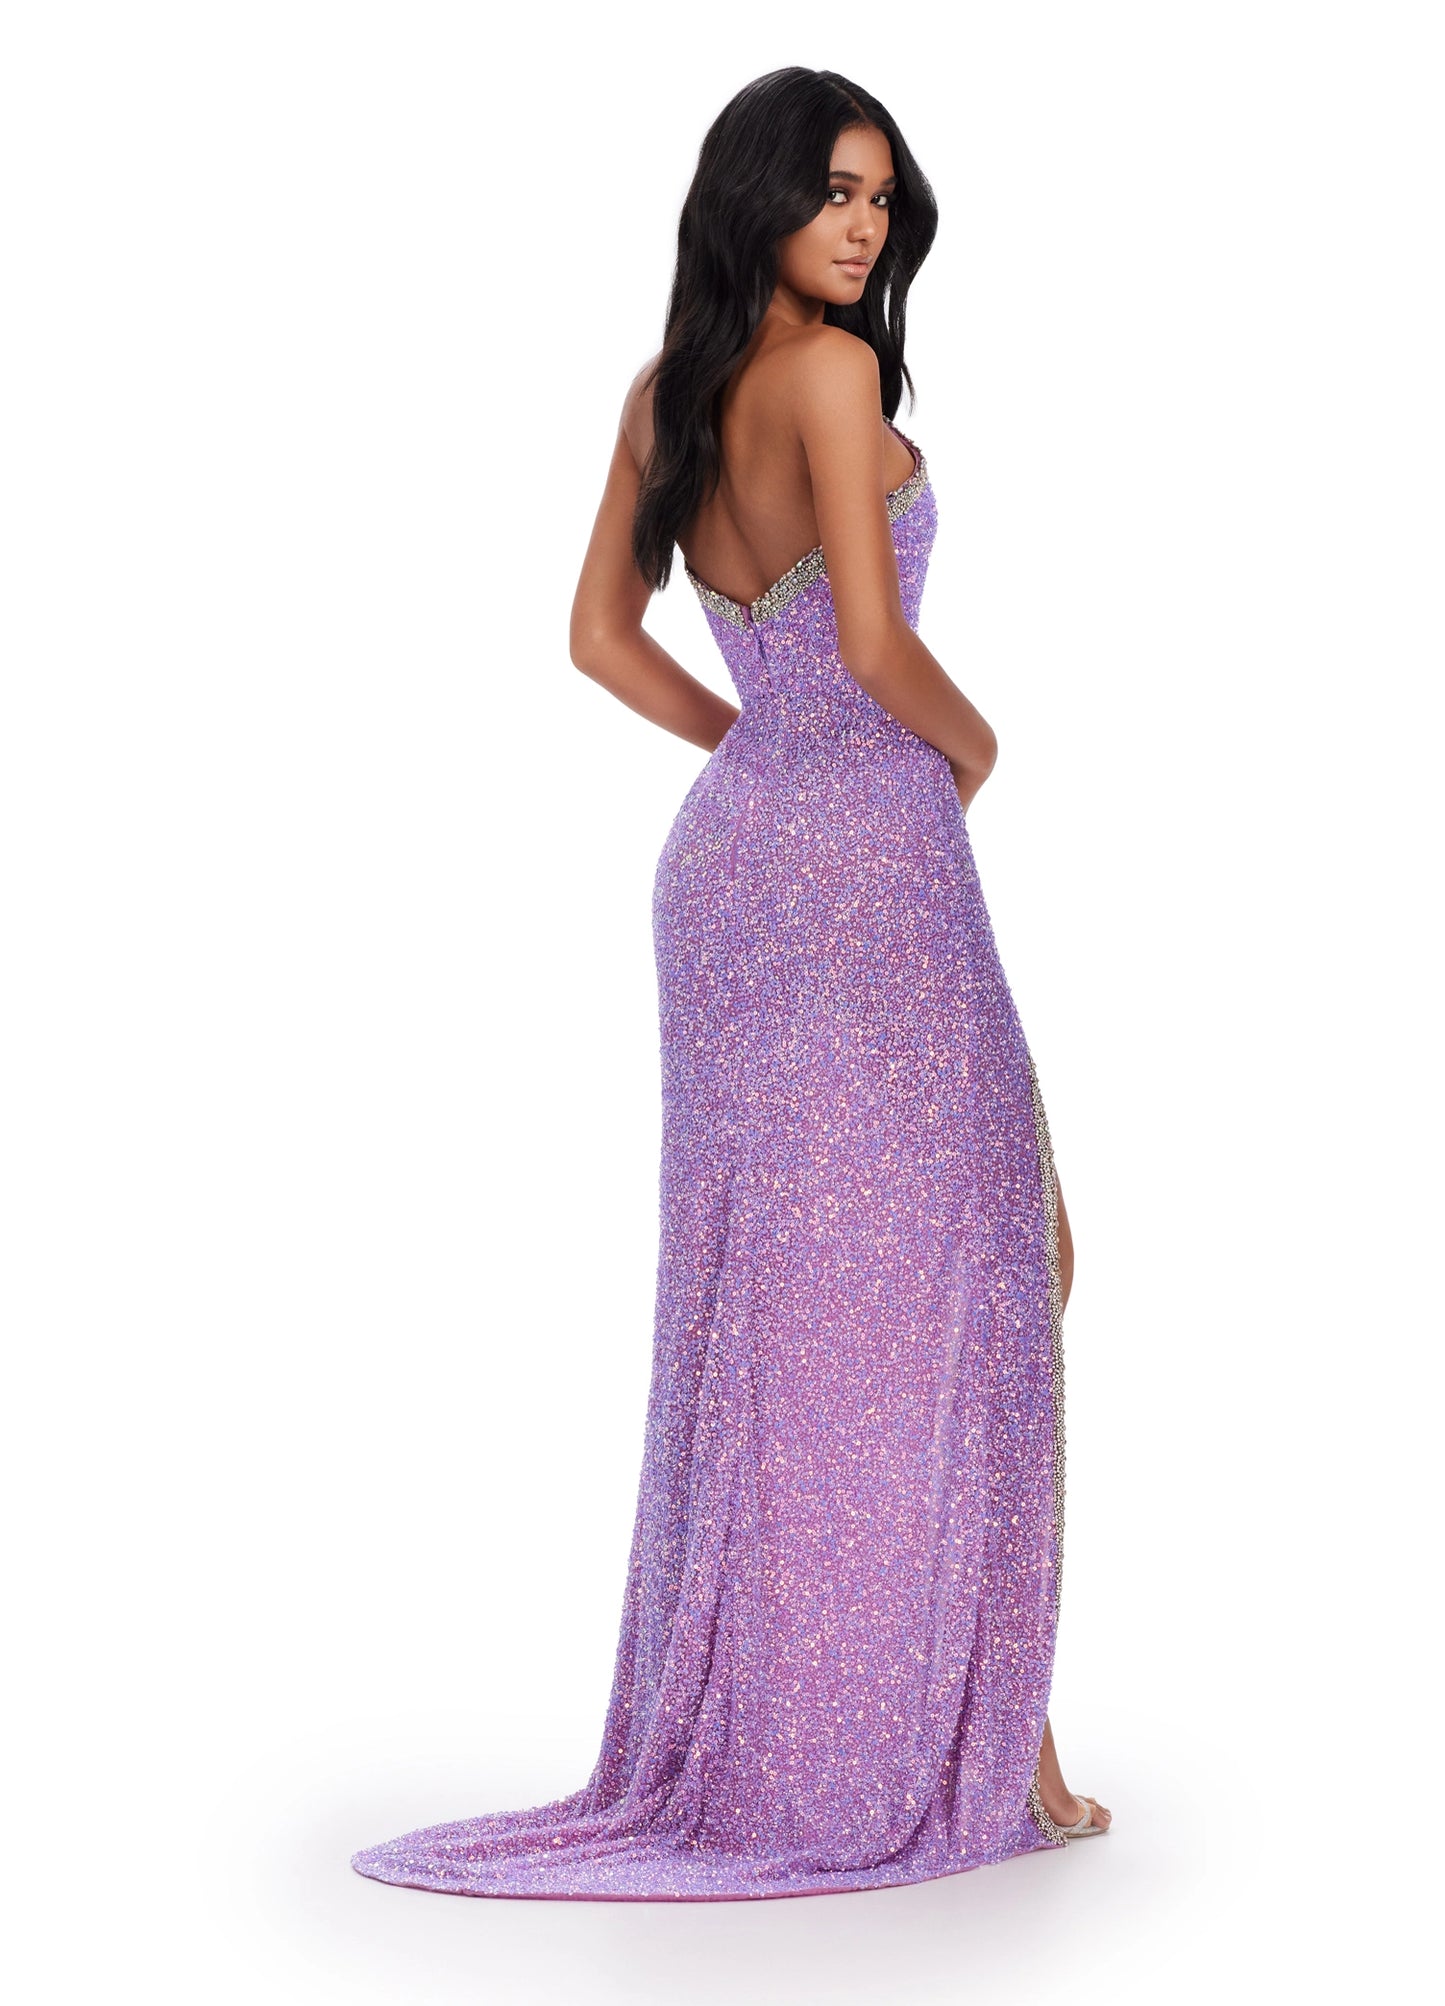 Look glamorous in this Ashley Lauren 11521 beaded sequin pageant dress. Featuring a strapless bodice, a crystal V neckline, beaded sequins, a full skirt with a slit, and a floor-length hem. Look absolutely stunning at your next formal event. Bring the glam! This fully beaded strapless gown features a deep v neckline and a left leg slit.